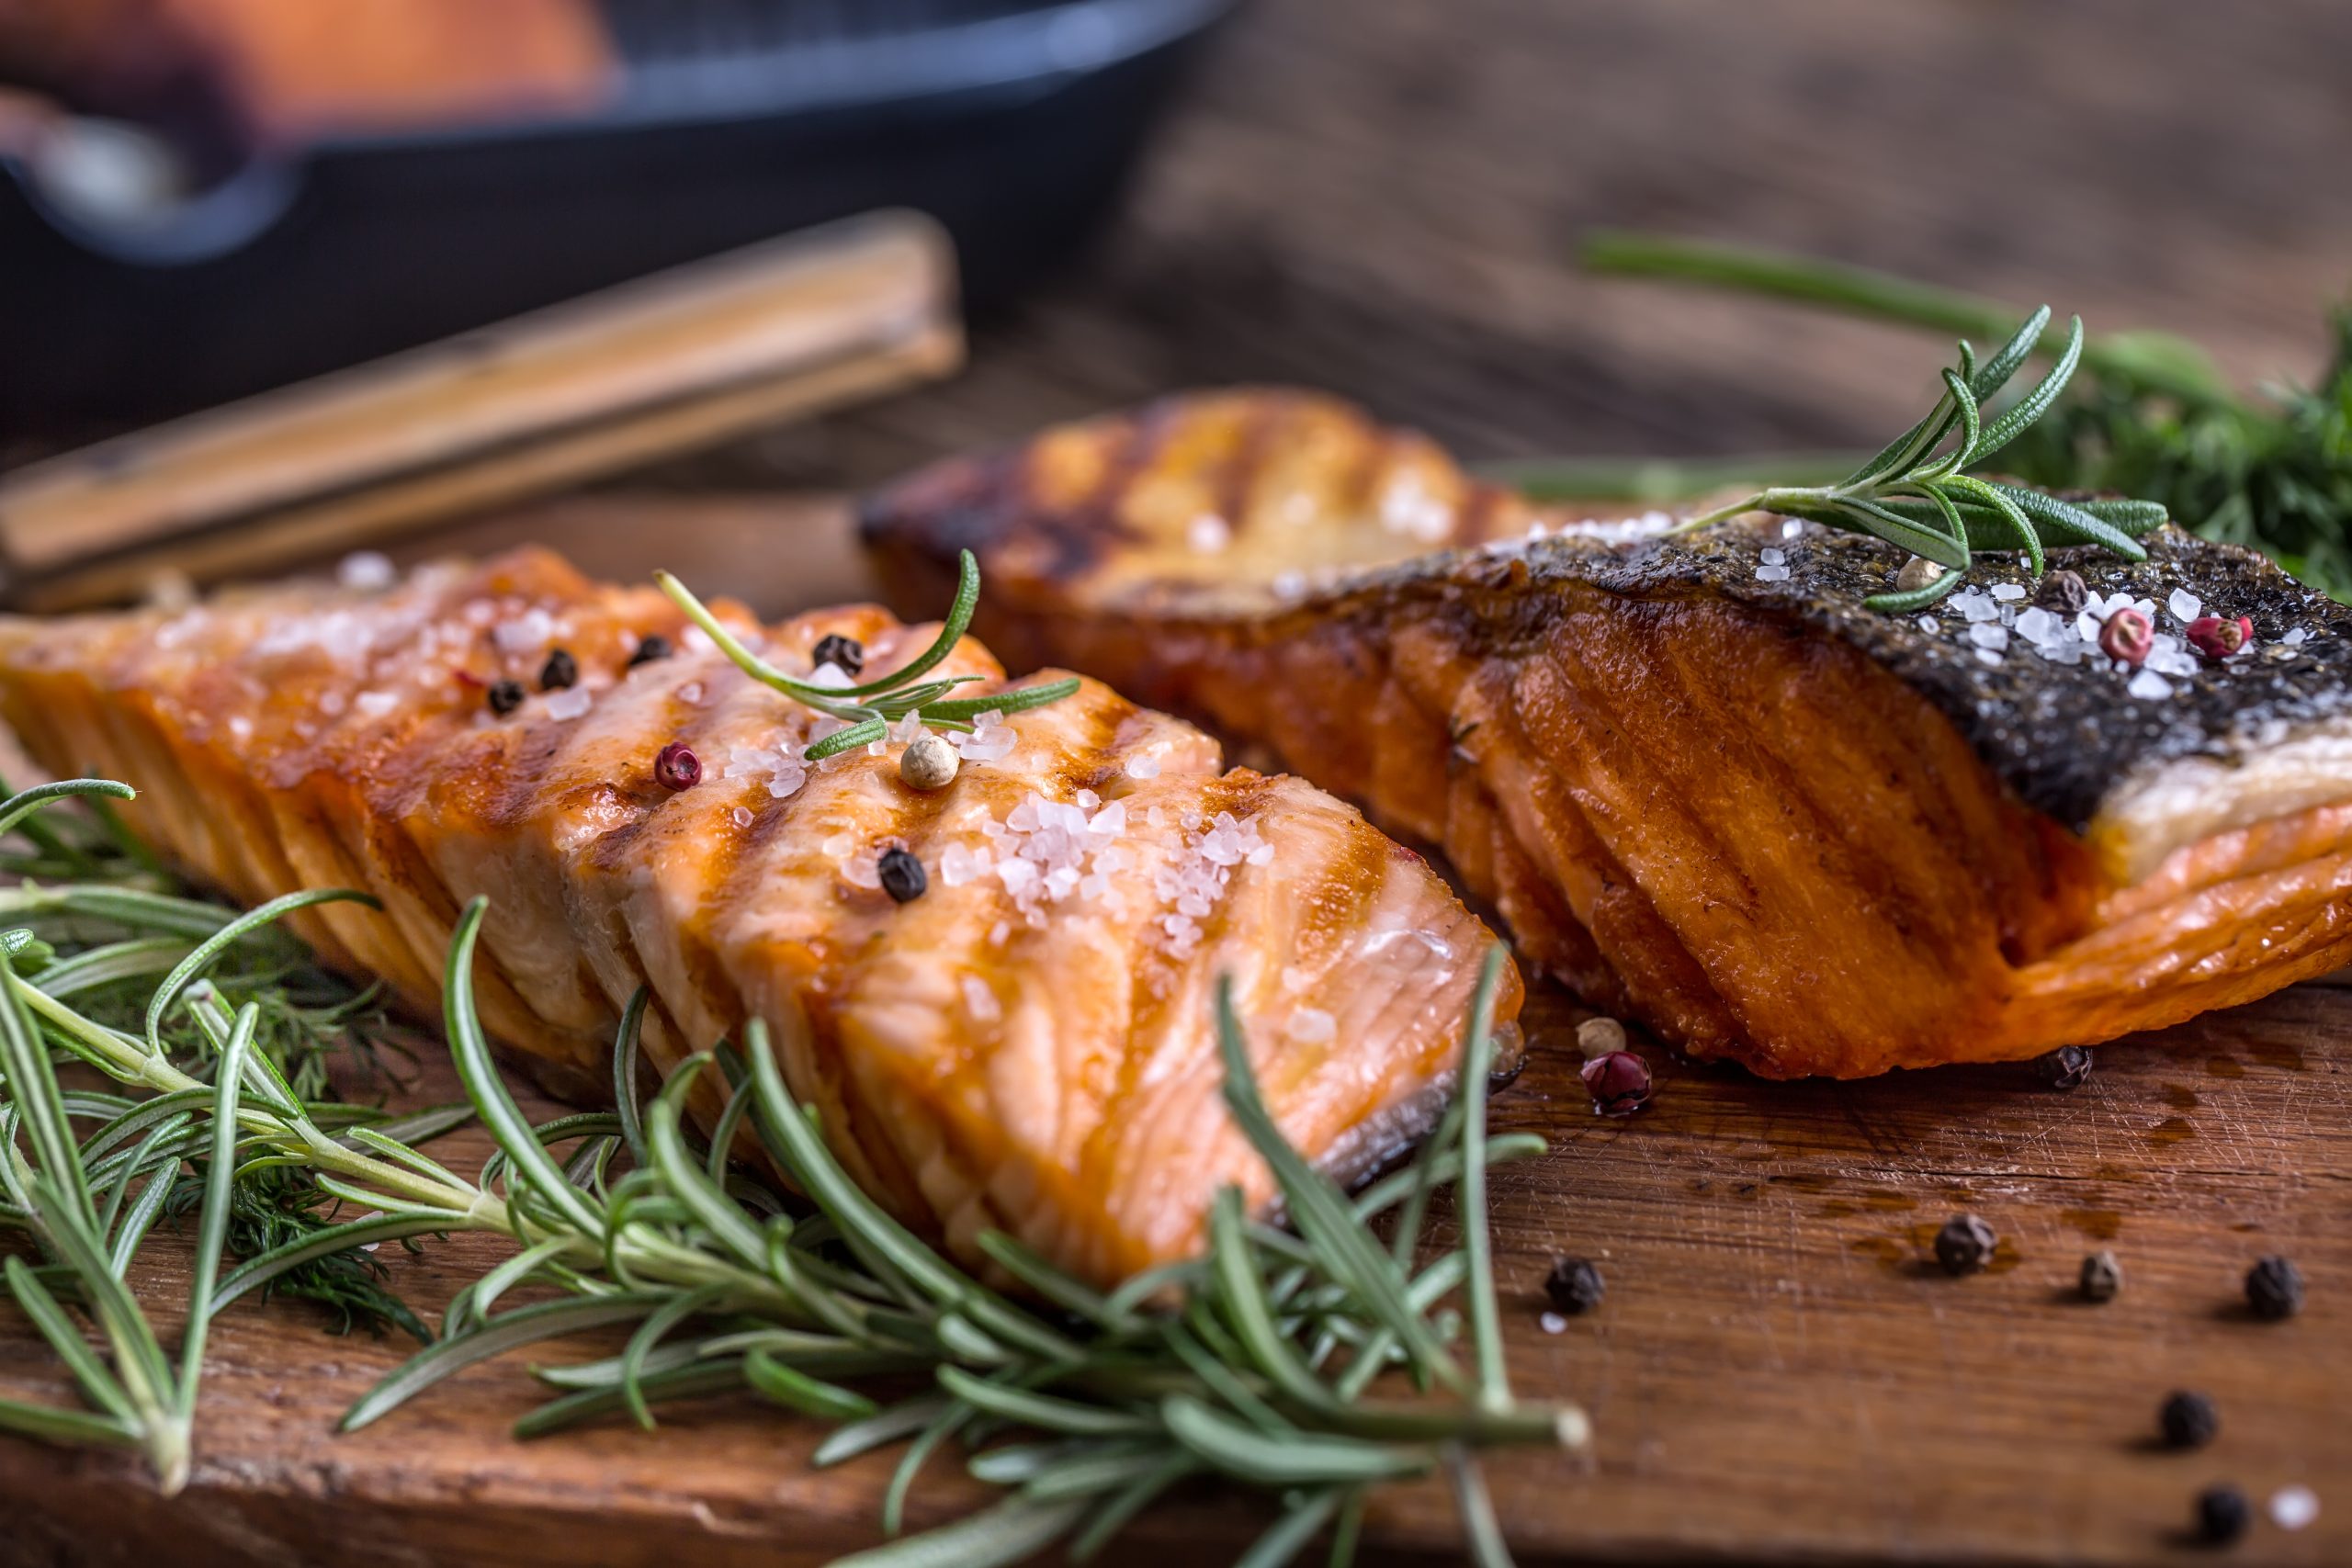 Grilled,Salmon,Fillets,With,Salt,Pepper,And,Herb,Decoration.